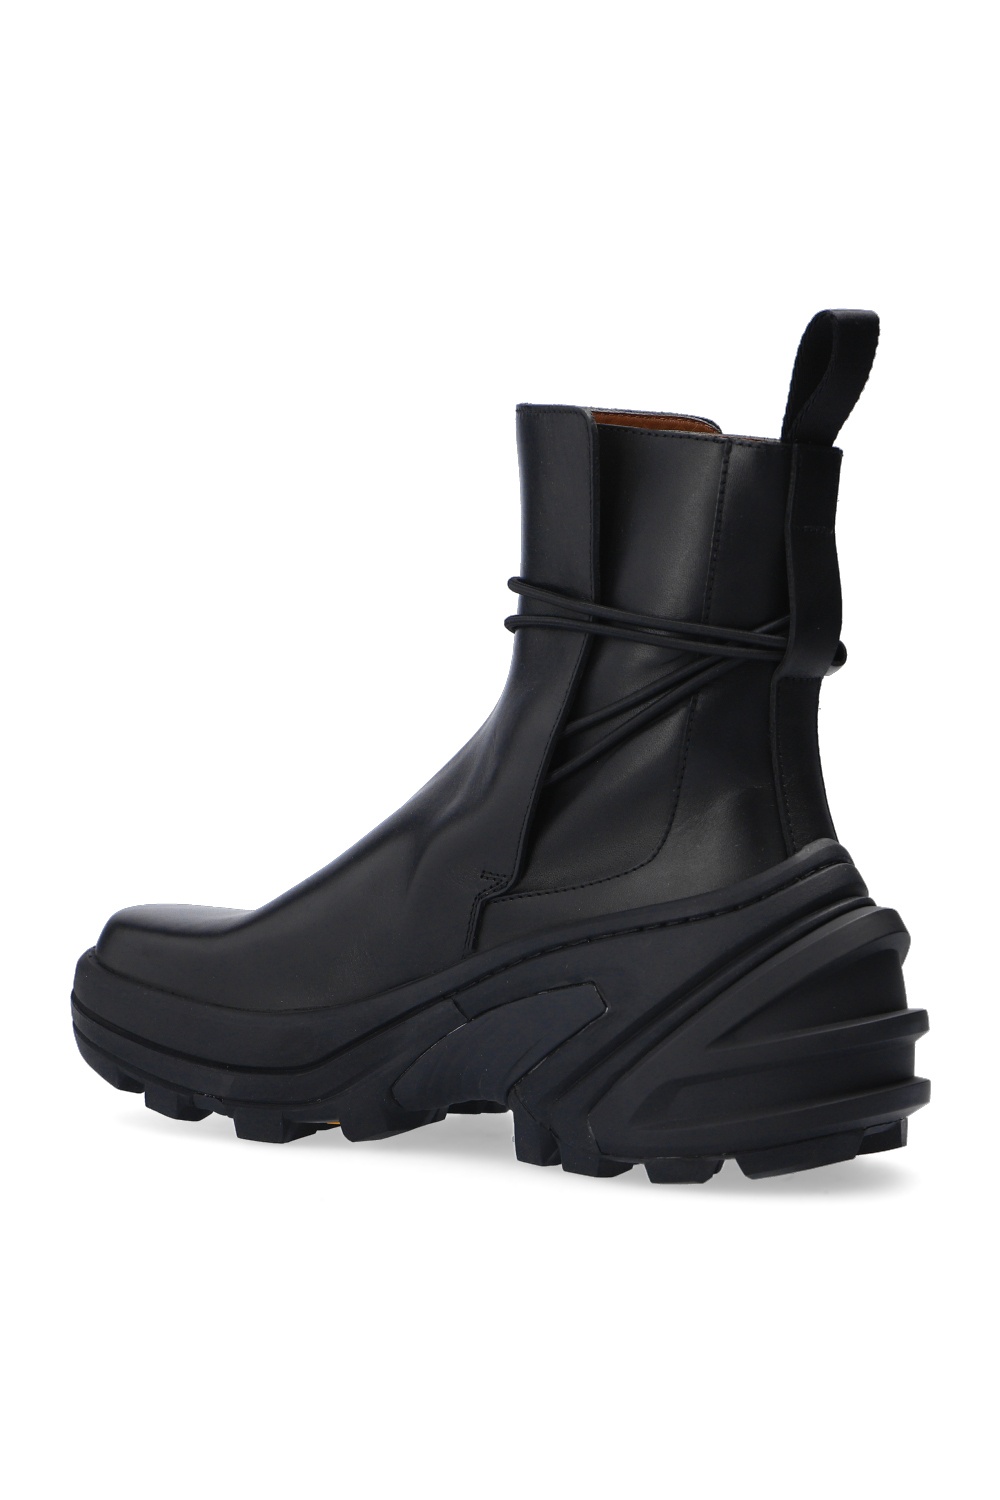 Black Chelsea boots with chunky sole 1017 ALYX 9SM - Vitkac Canada